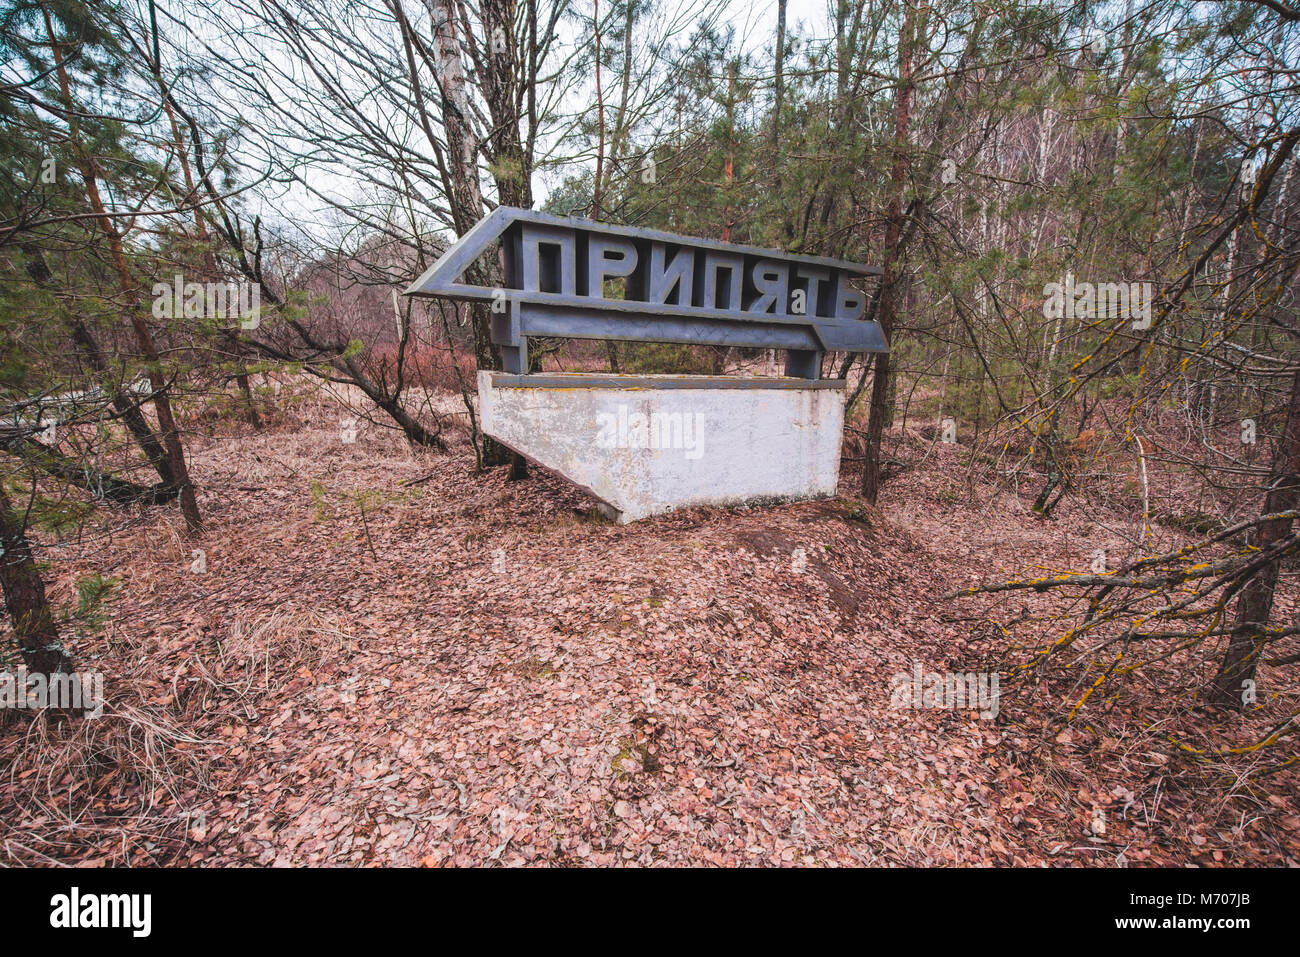 Ukraine, Chernobyl: Abandoned vehicles, houses and places from the evacuated Chernobyl exclusion zone. Photo: Alessandro Bosio Stock Photo